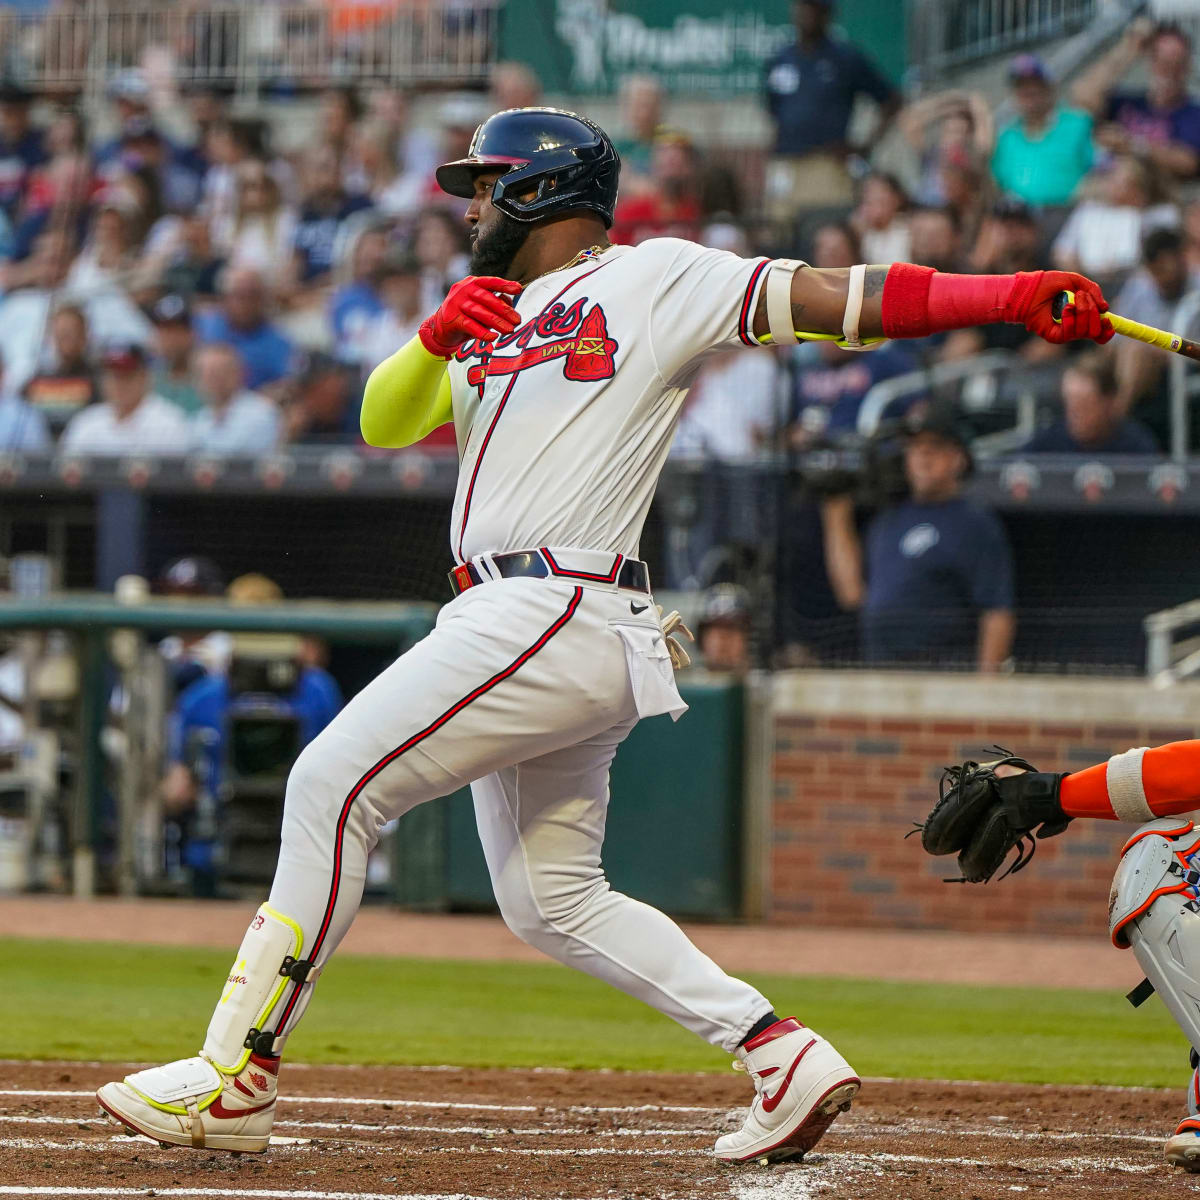 Washington Nationals suffer 16-4 loss to Braves a night after 11-2